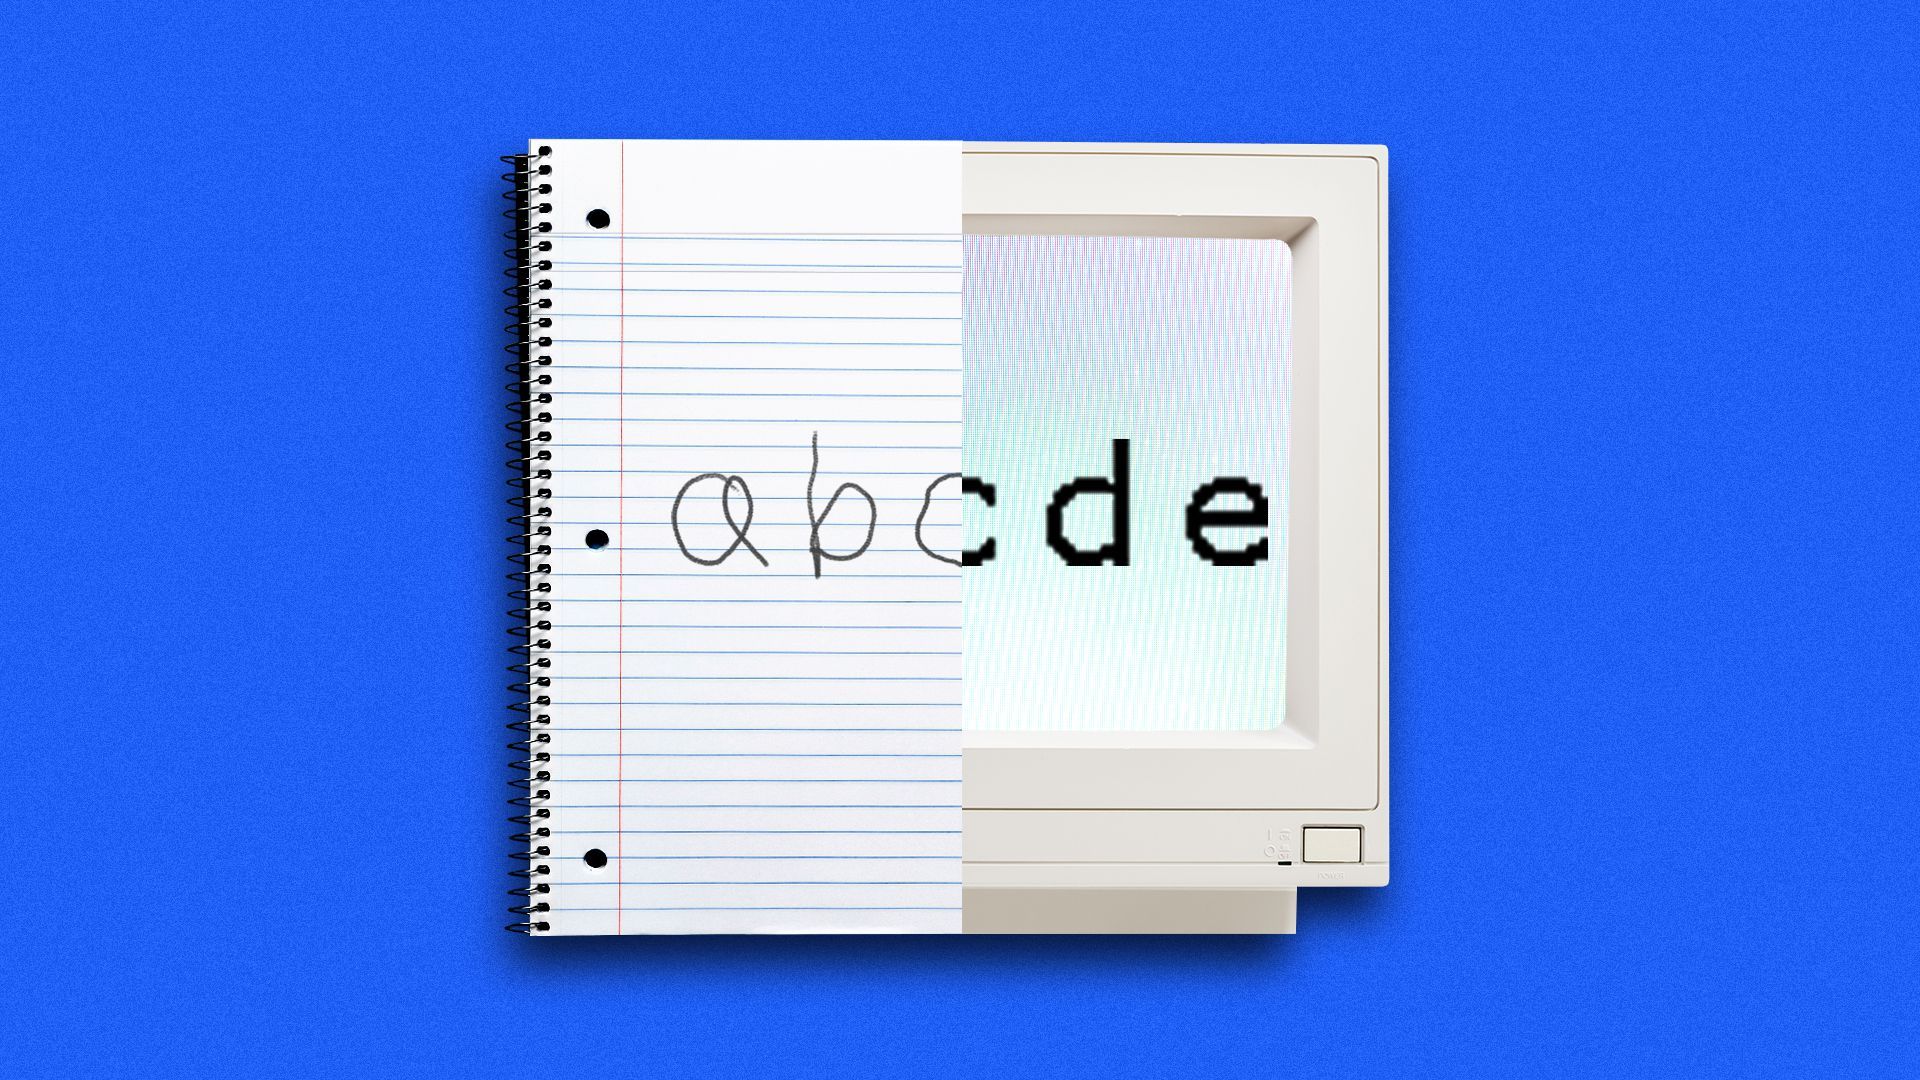 Illustration of a notebook and computer juxtaposed with handwritten and typed abc's on the devices